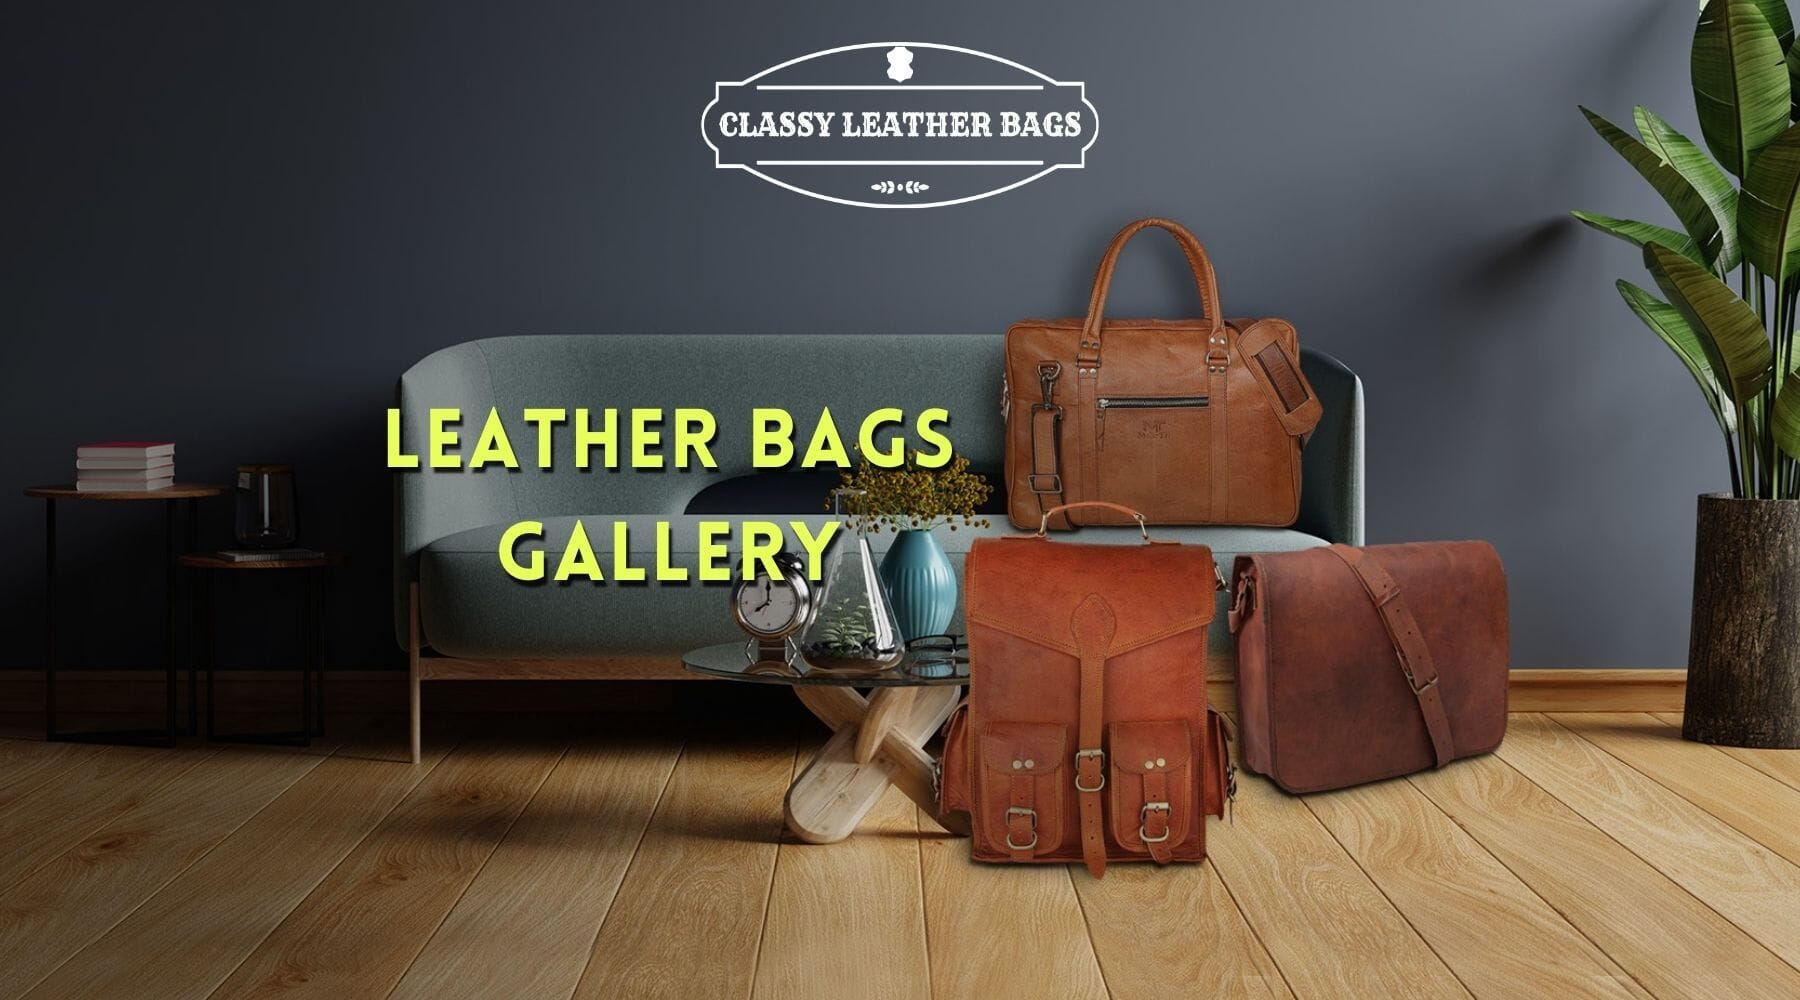 10 Vintage Leather Bags Gallery on Classy Leather Bags for you!